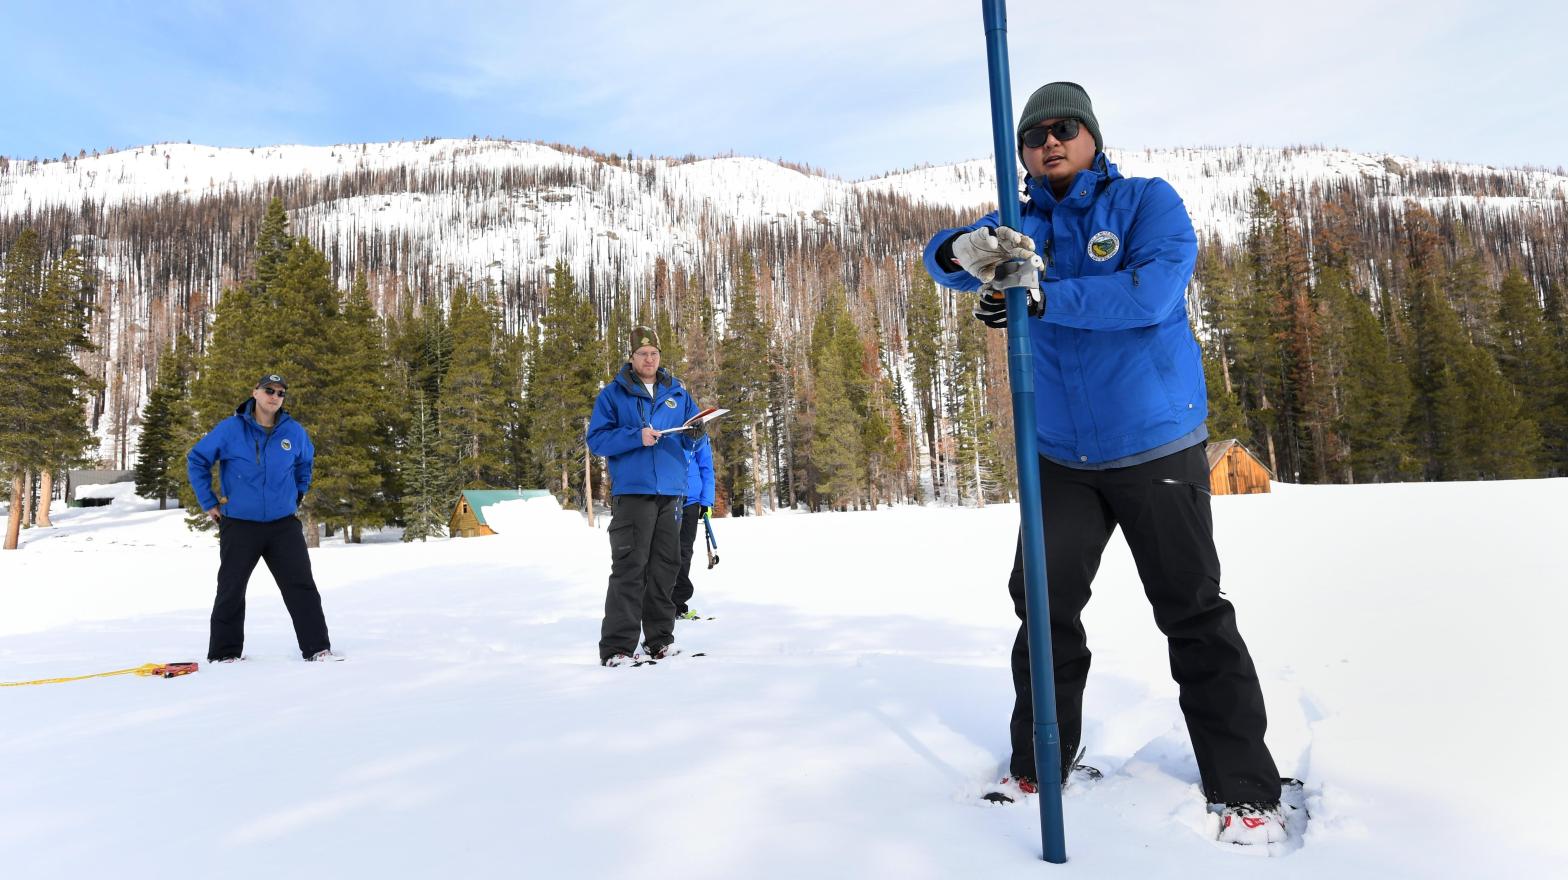 Department of Water Resources employees measure snow depth at Phillips Station in the Sierra Nevada Mountains on Feb 1, 2023 (Photo: Kenneth James / California Department of Water Resources, Fair Use)